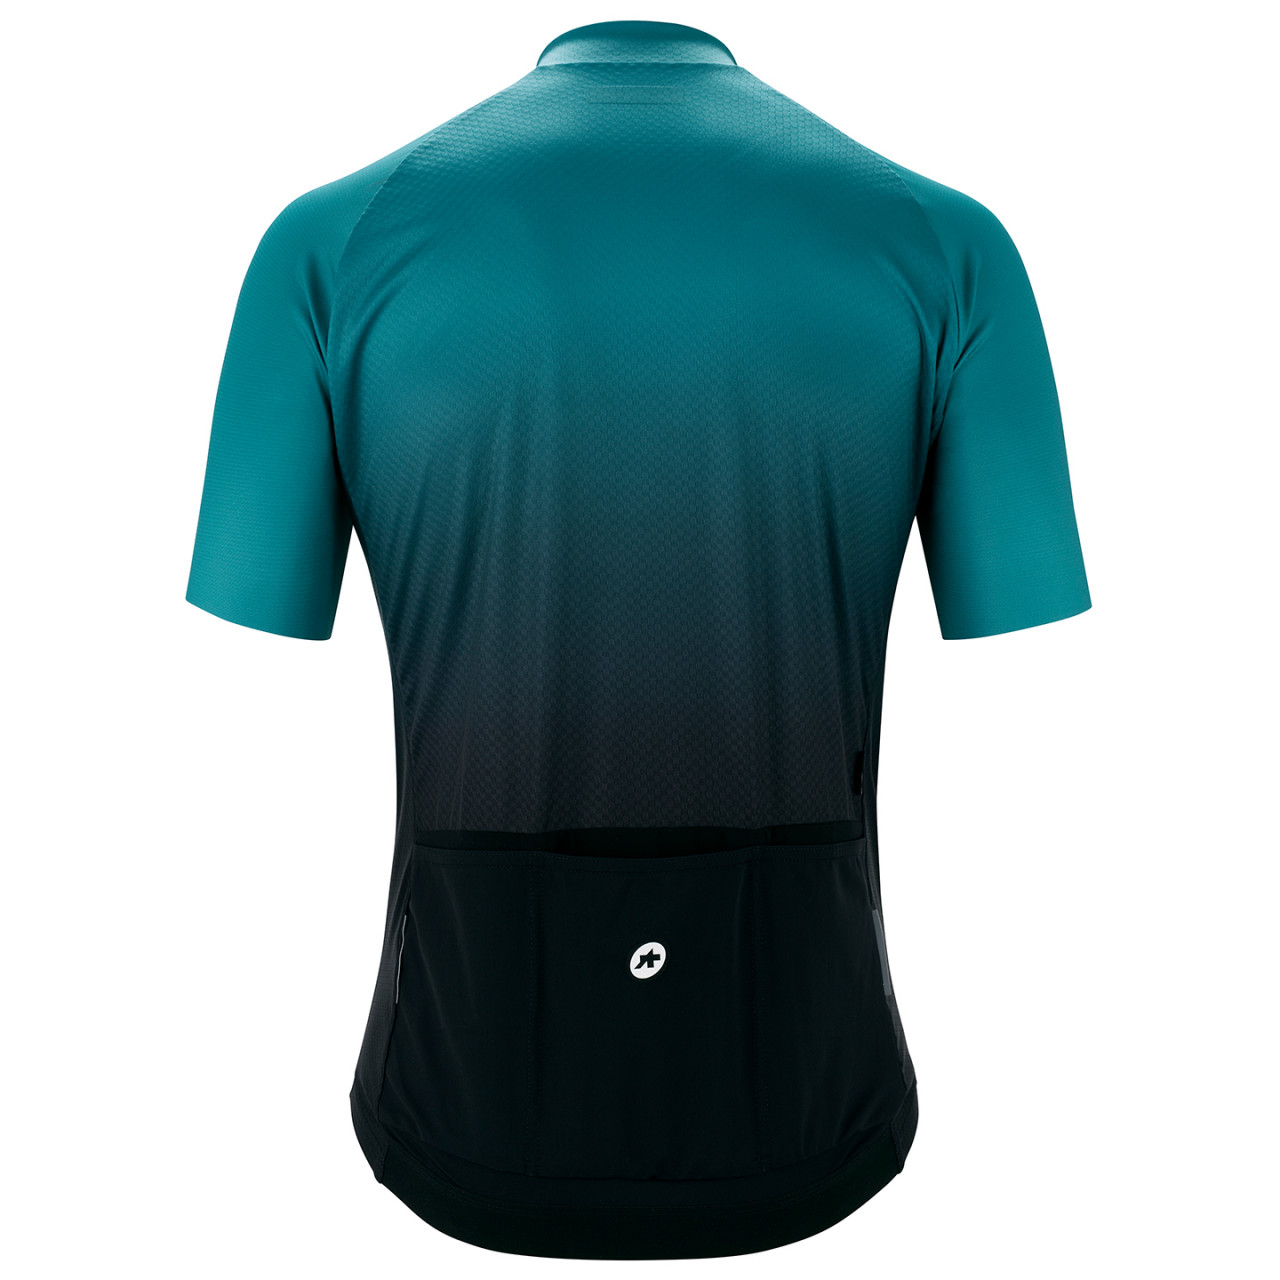 Maillot mangas cortas Mille GT c2 Shifter